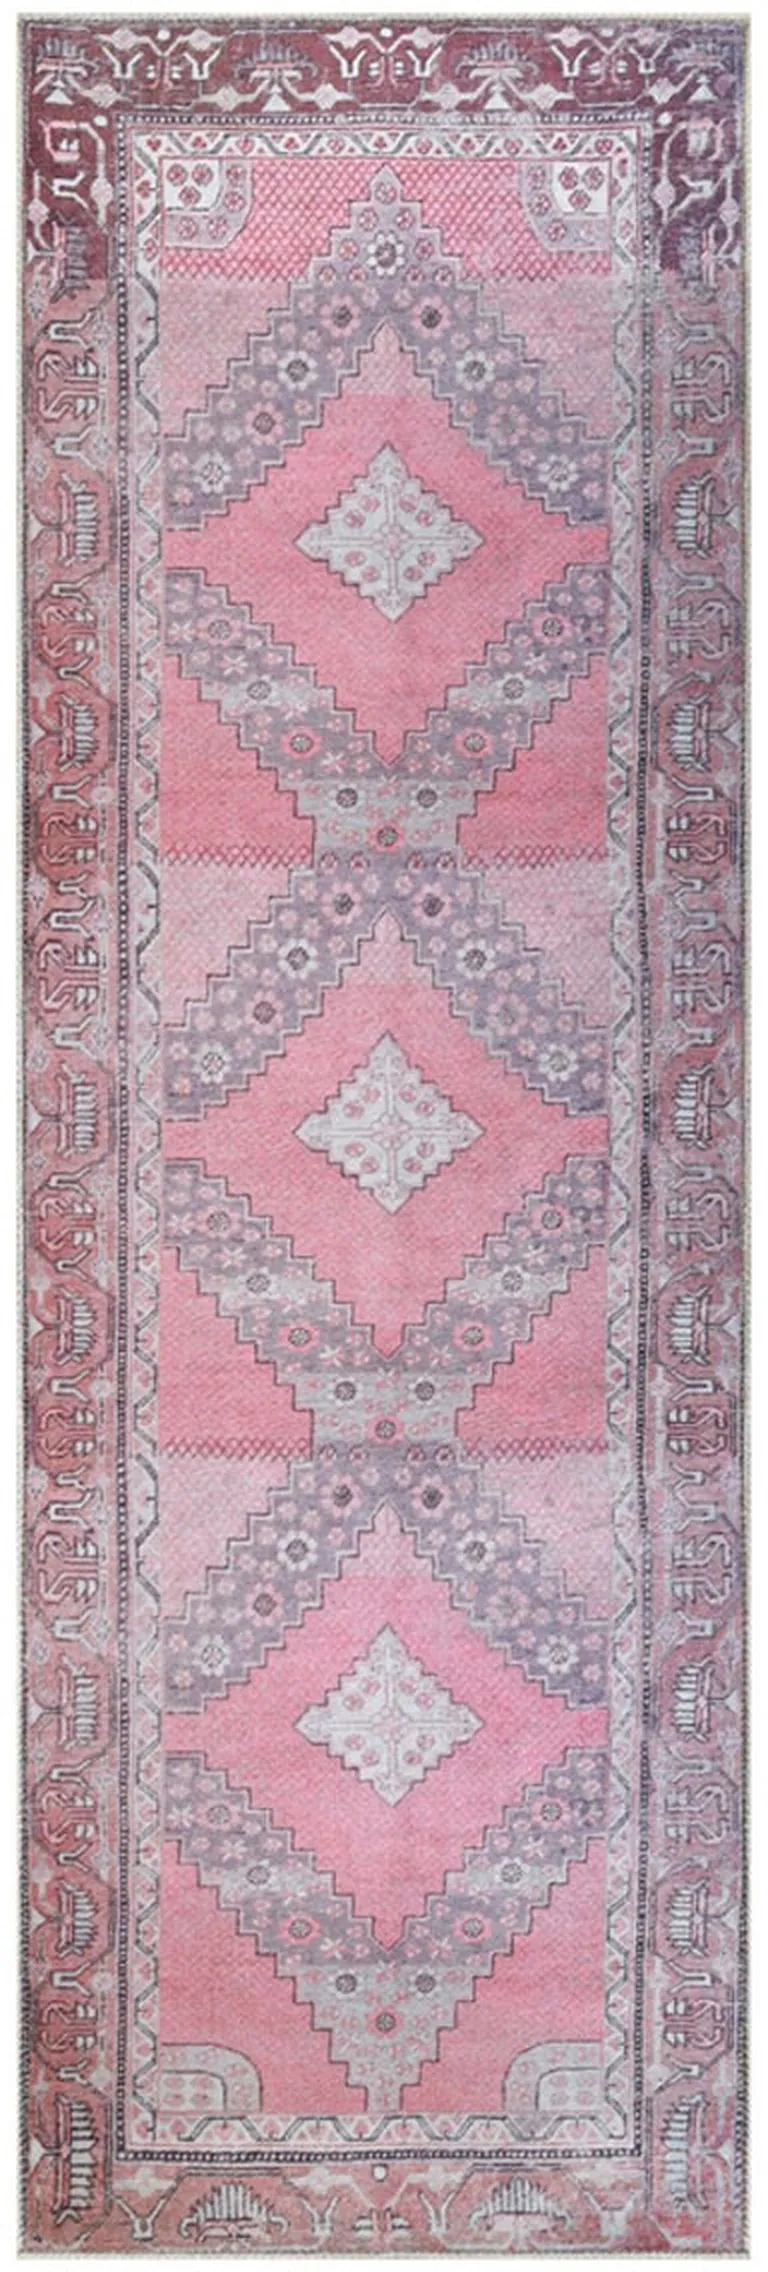 8' Pink Geometric Power Loom Distressed Stain Resistant Non Skid Runner Rug Photo 1